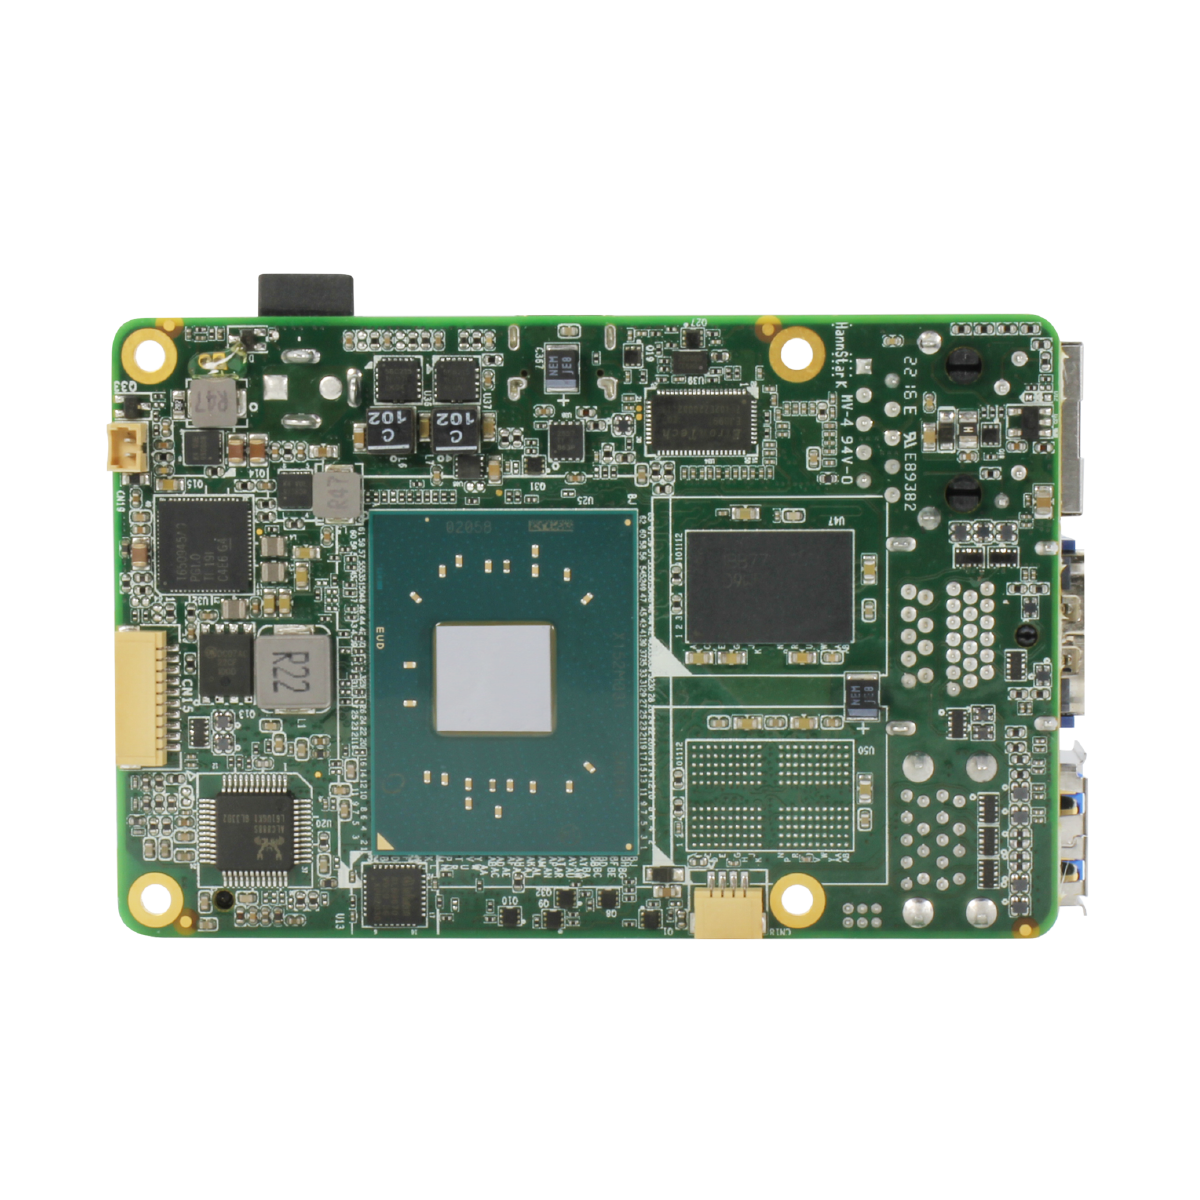 The new UP 4000 aims to Bridge the Gap to the Next Generation UP Board